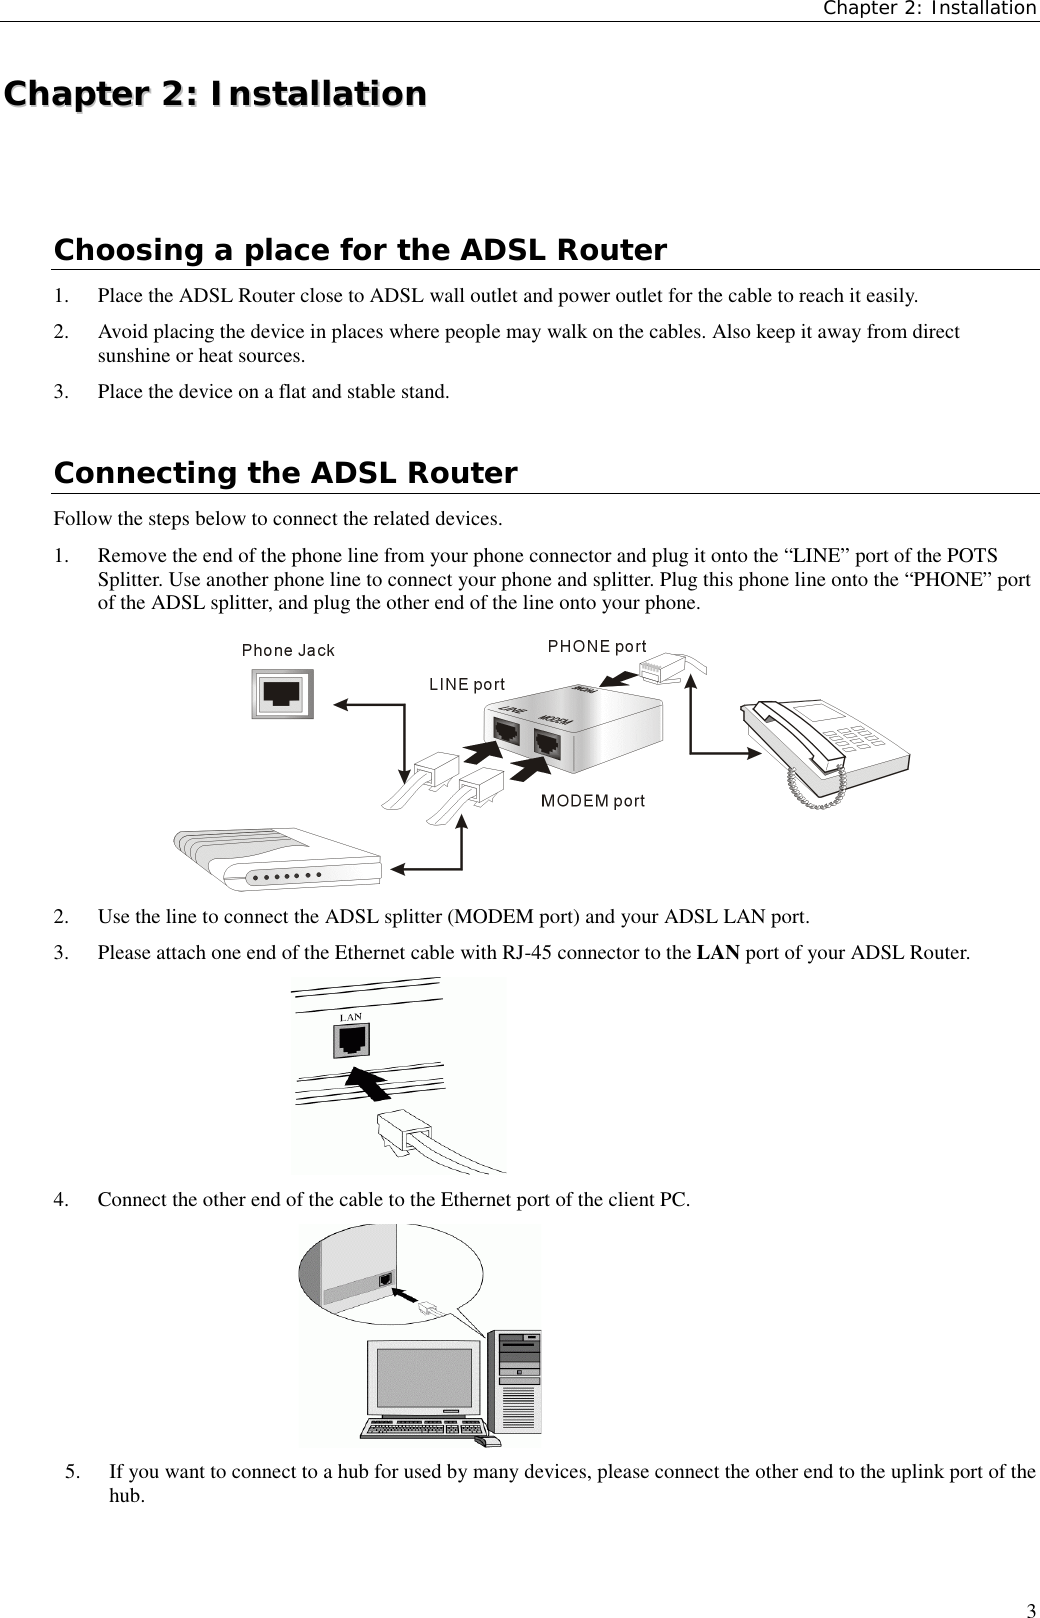 Chapter 2: Installation3CChhaapptteerr  22::  IInnssttaallllaattiioonnChoosing a place for the ADSL Router1. Place the ADSL Router close to ADSL wall outlet and power outlet for the cable to reach it easily.2. Avoid placing the device in places where people may walk on the cables. Also keep it away from directsunshine or heat sources.3. Place the device on a flat and stable stand.Connecting the ADSL RouterFollow the steps below to connect the related devices.1. Remove the end of the phone line from your phone connector and plug it onto the “LINE” port of the POTSSplitter. Use another phone line to connect your phone and splitter. Plug this phone line onto the “PHONE” portof the ADSL splitter, and plug the other end of the line onto your phone.2. Use the line to connect the ADSL splitter (MODEM port) and your ADSL LAN port.3. Please attach one end of the Ethernet cable with RJ-45 connector to the LAN port of your ADSL Router.4. Connect the other end of the cable to the Ethernet port of the client PC.5. If you want to connect to a hub for used by many devices, please connect the other end to the uplink port of thehub.